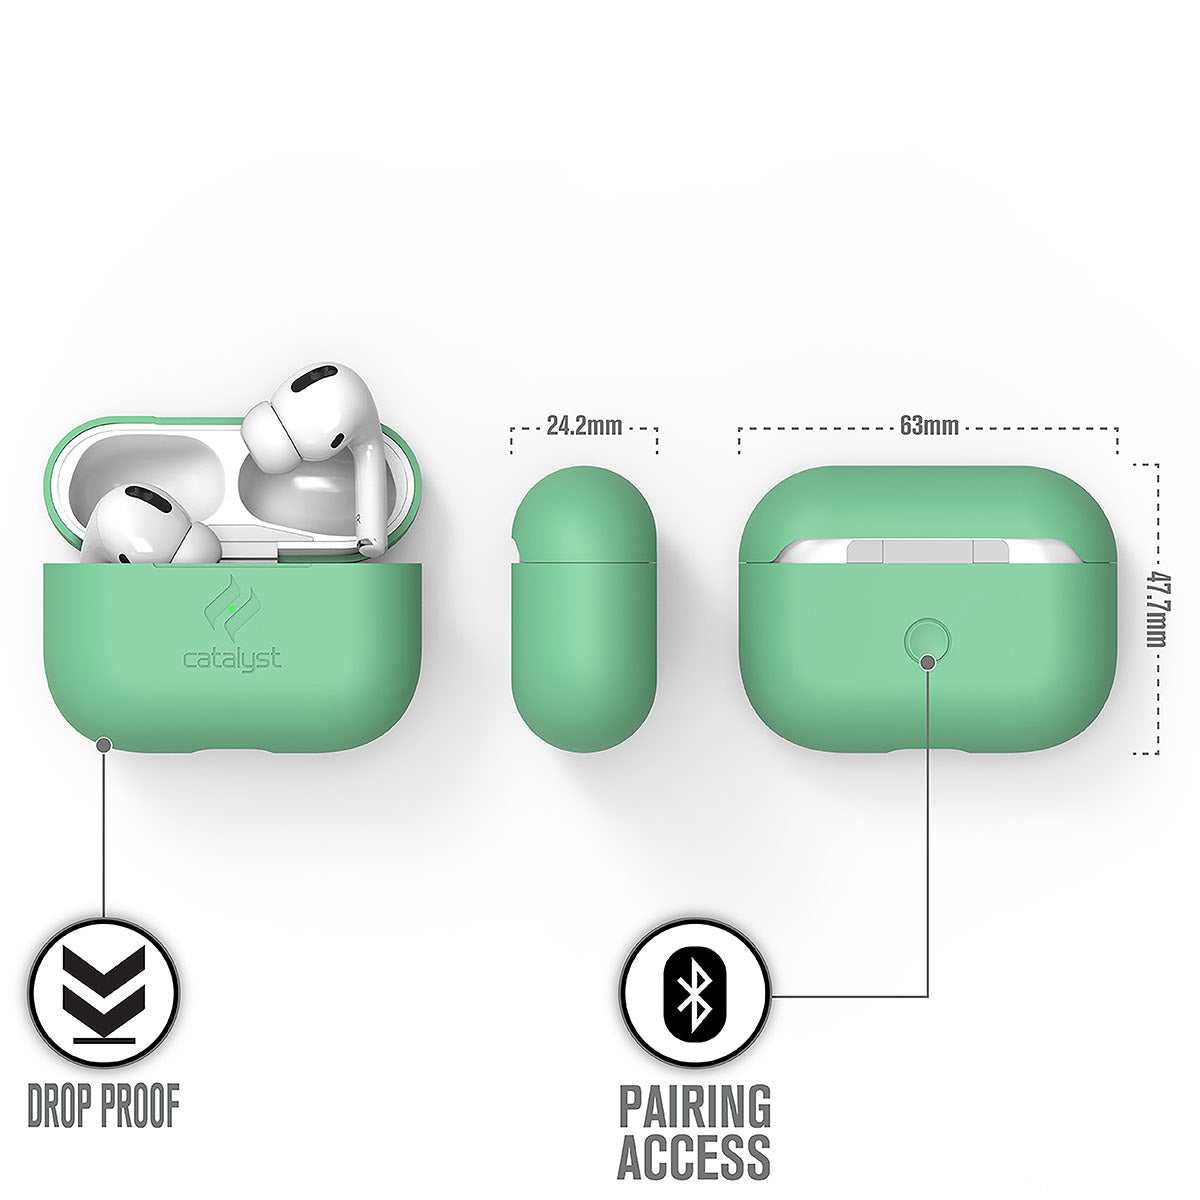 Catalyst airpods pro gen 2/1 slim case showing the case dimensions in a mint green colorway text reads drop proof pairing access